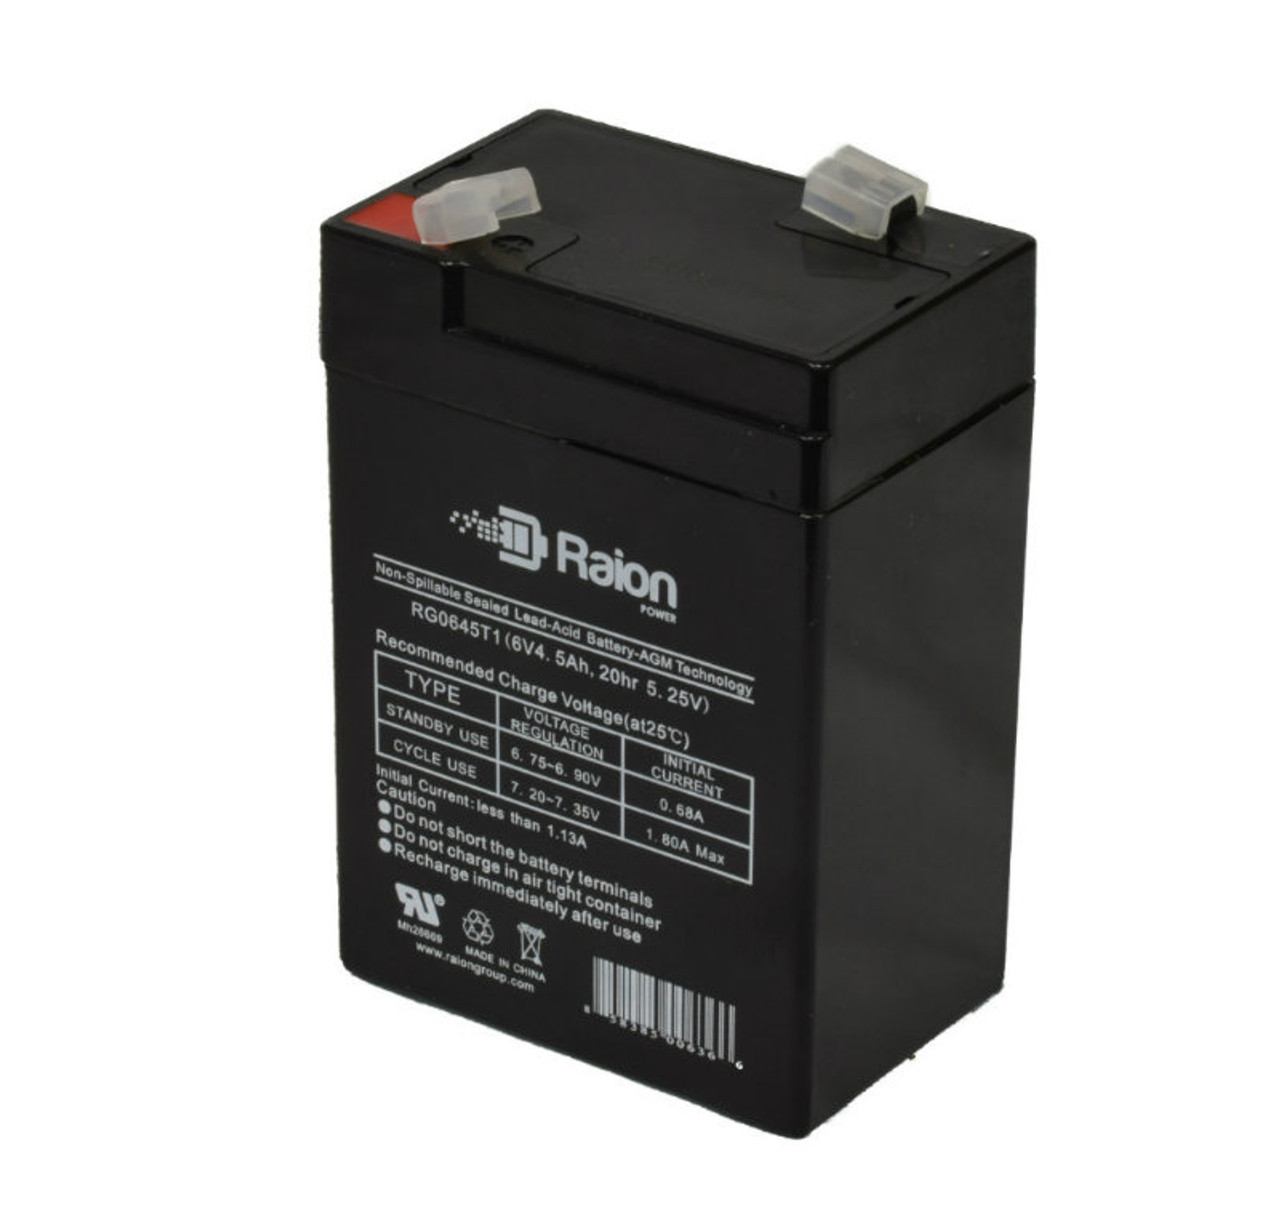 Raion Power RG0645T1 6V 4.5Ah Replacement Battery Cartridge for Tianchang TC6-4-S